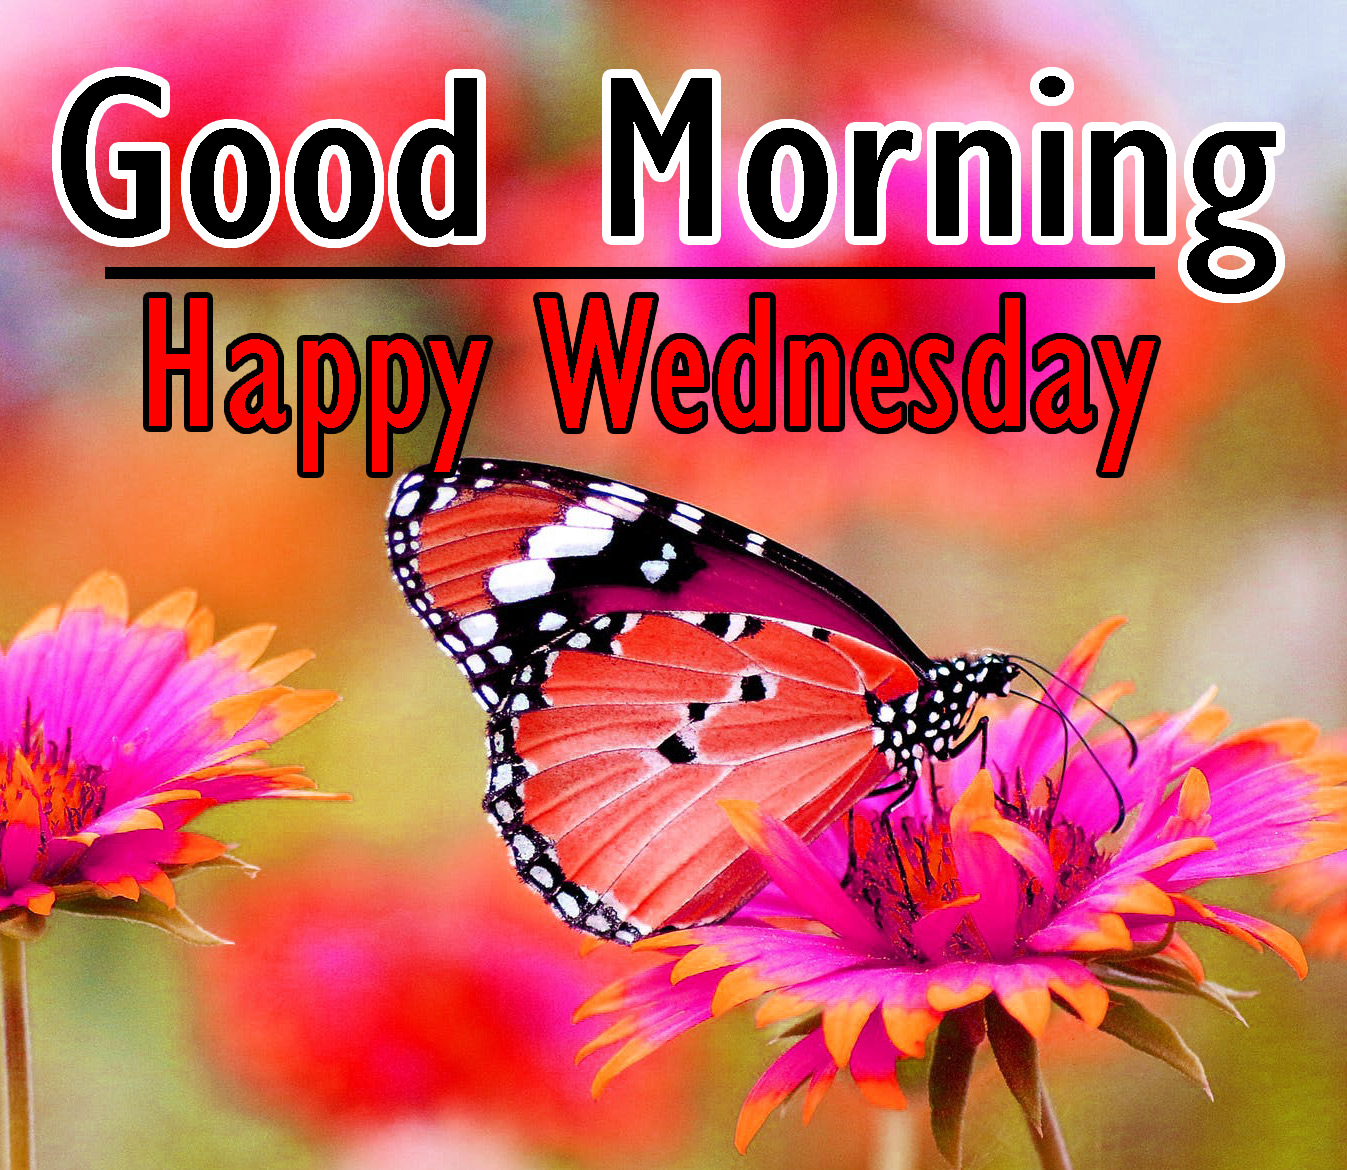 Good Morning Wednesday Images Pics Download 